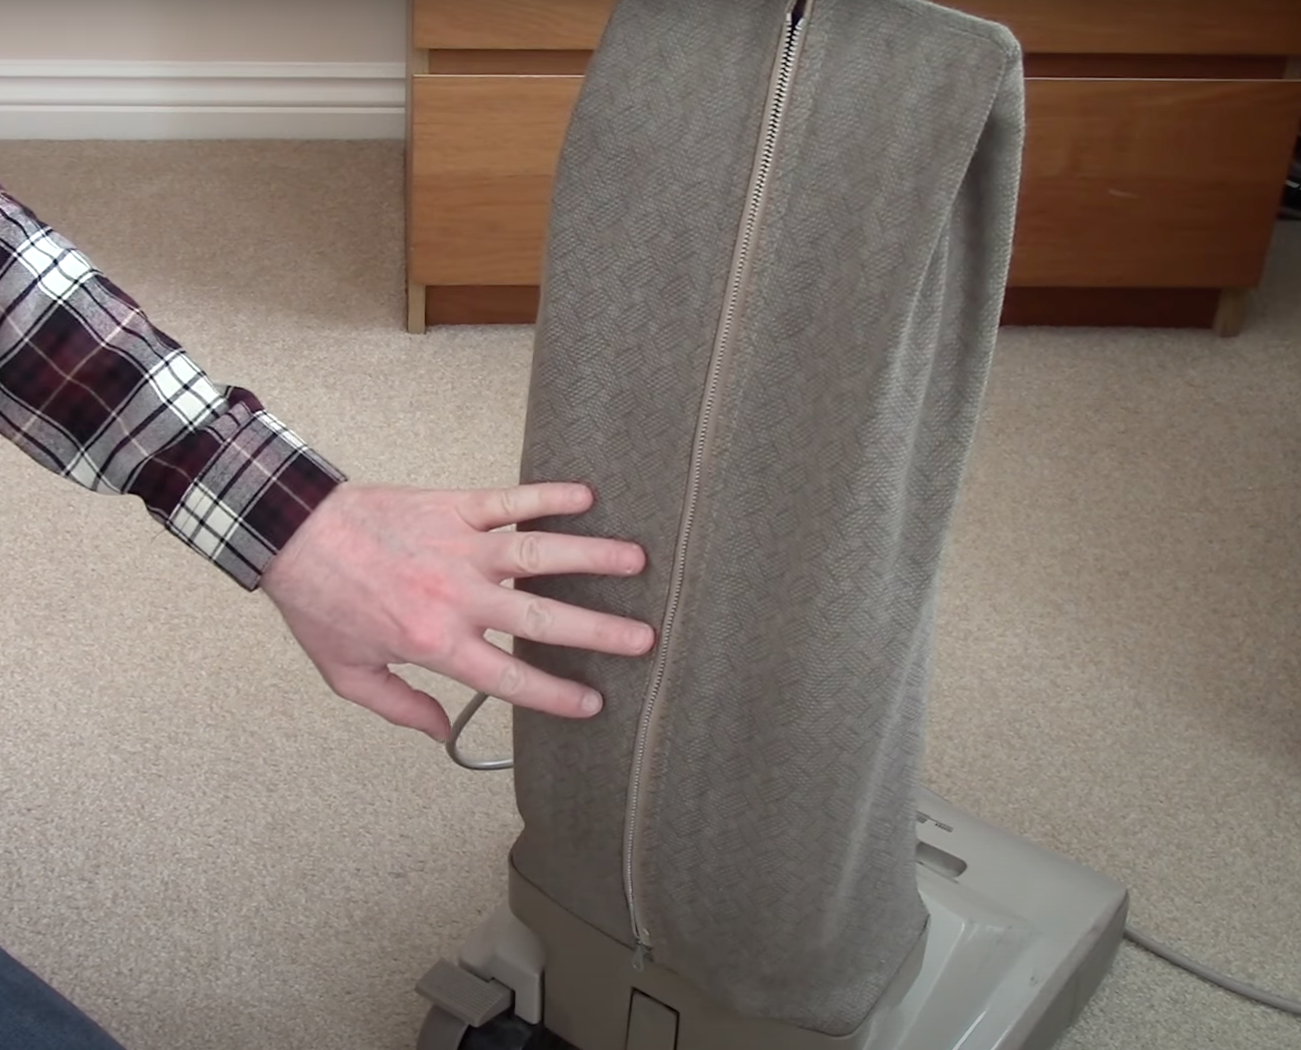 Screen shot of hand touching back of upright vacuum bag